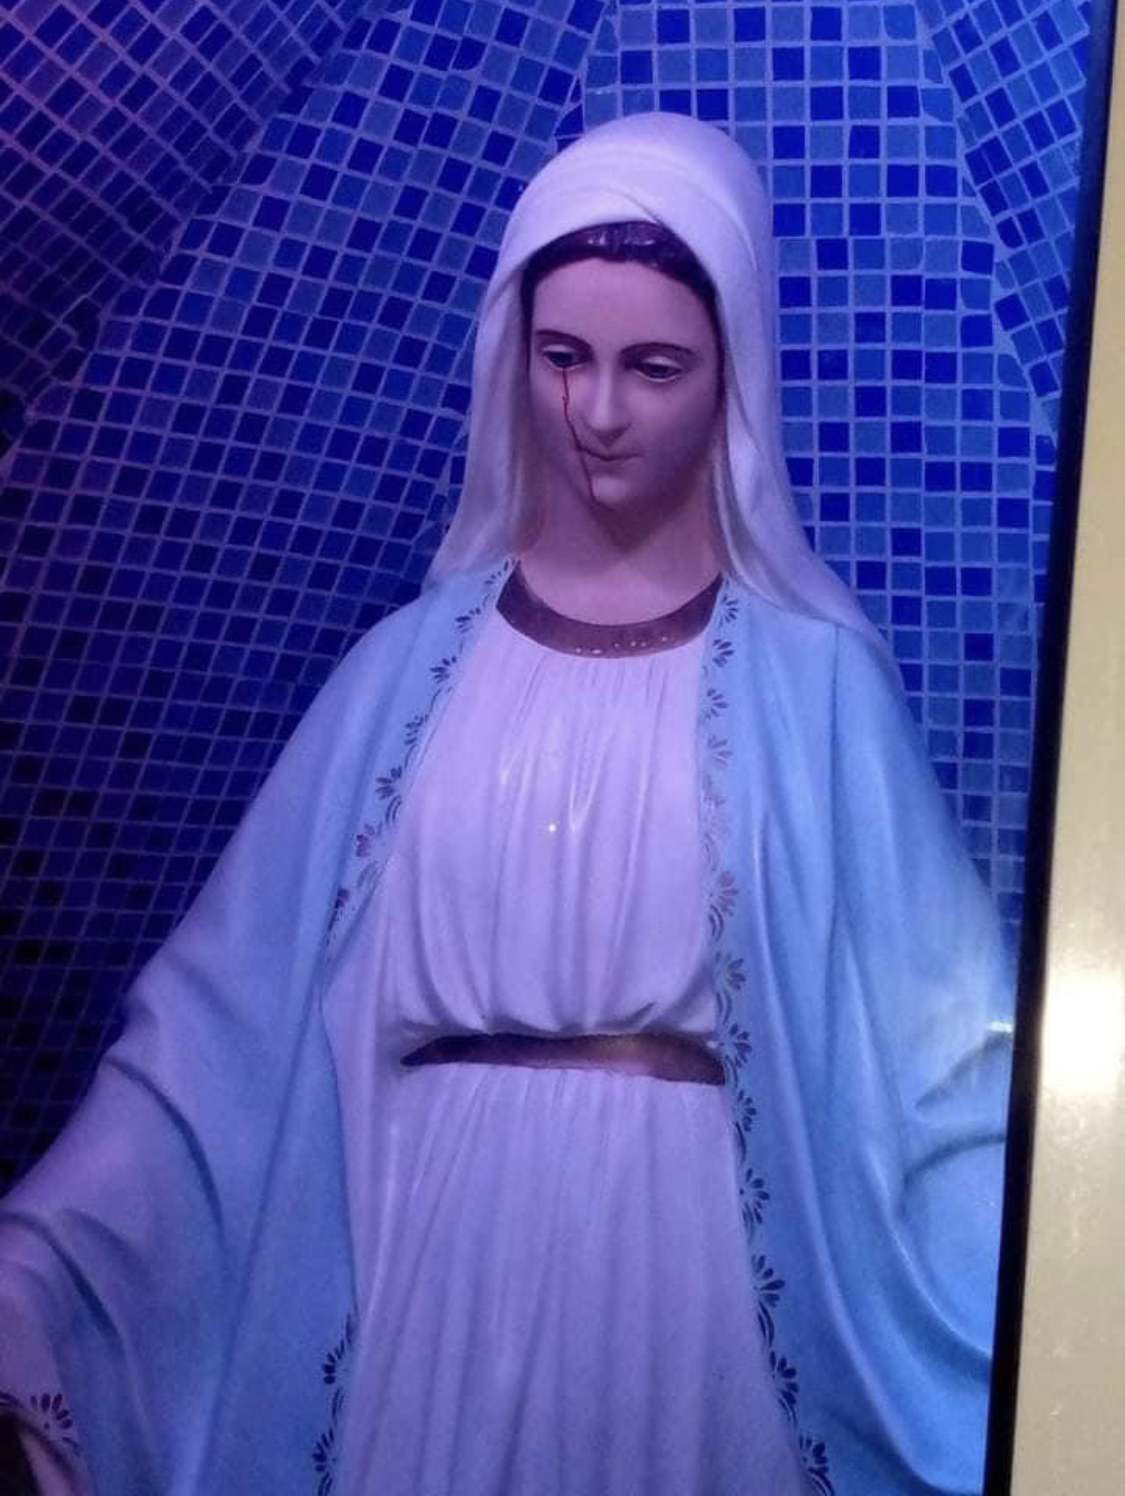 Statue of Virgin Mary cries blood in Lagos - Catholic Priest Reveals [photos]